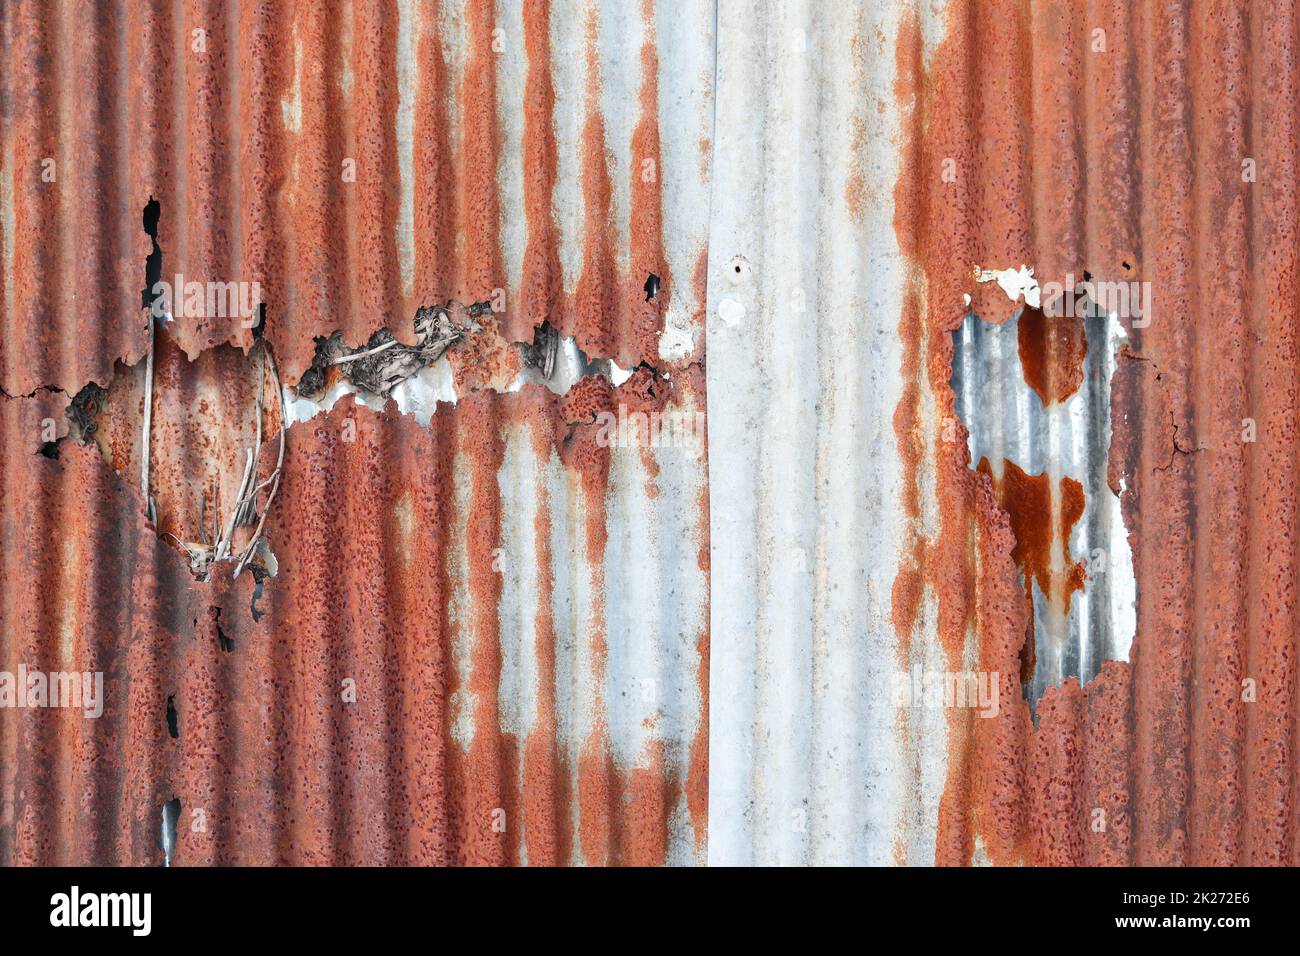 Rust that corrosion  metal surfaces causes strange colors. The surface of the metal is rusted, corrosion causes the metal to look old because of the c Stock Photo